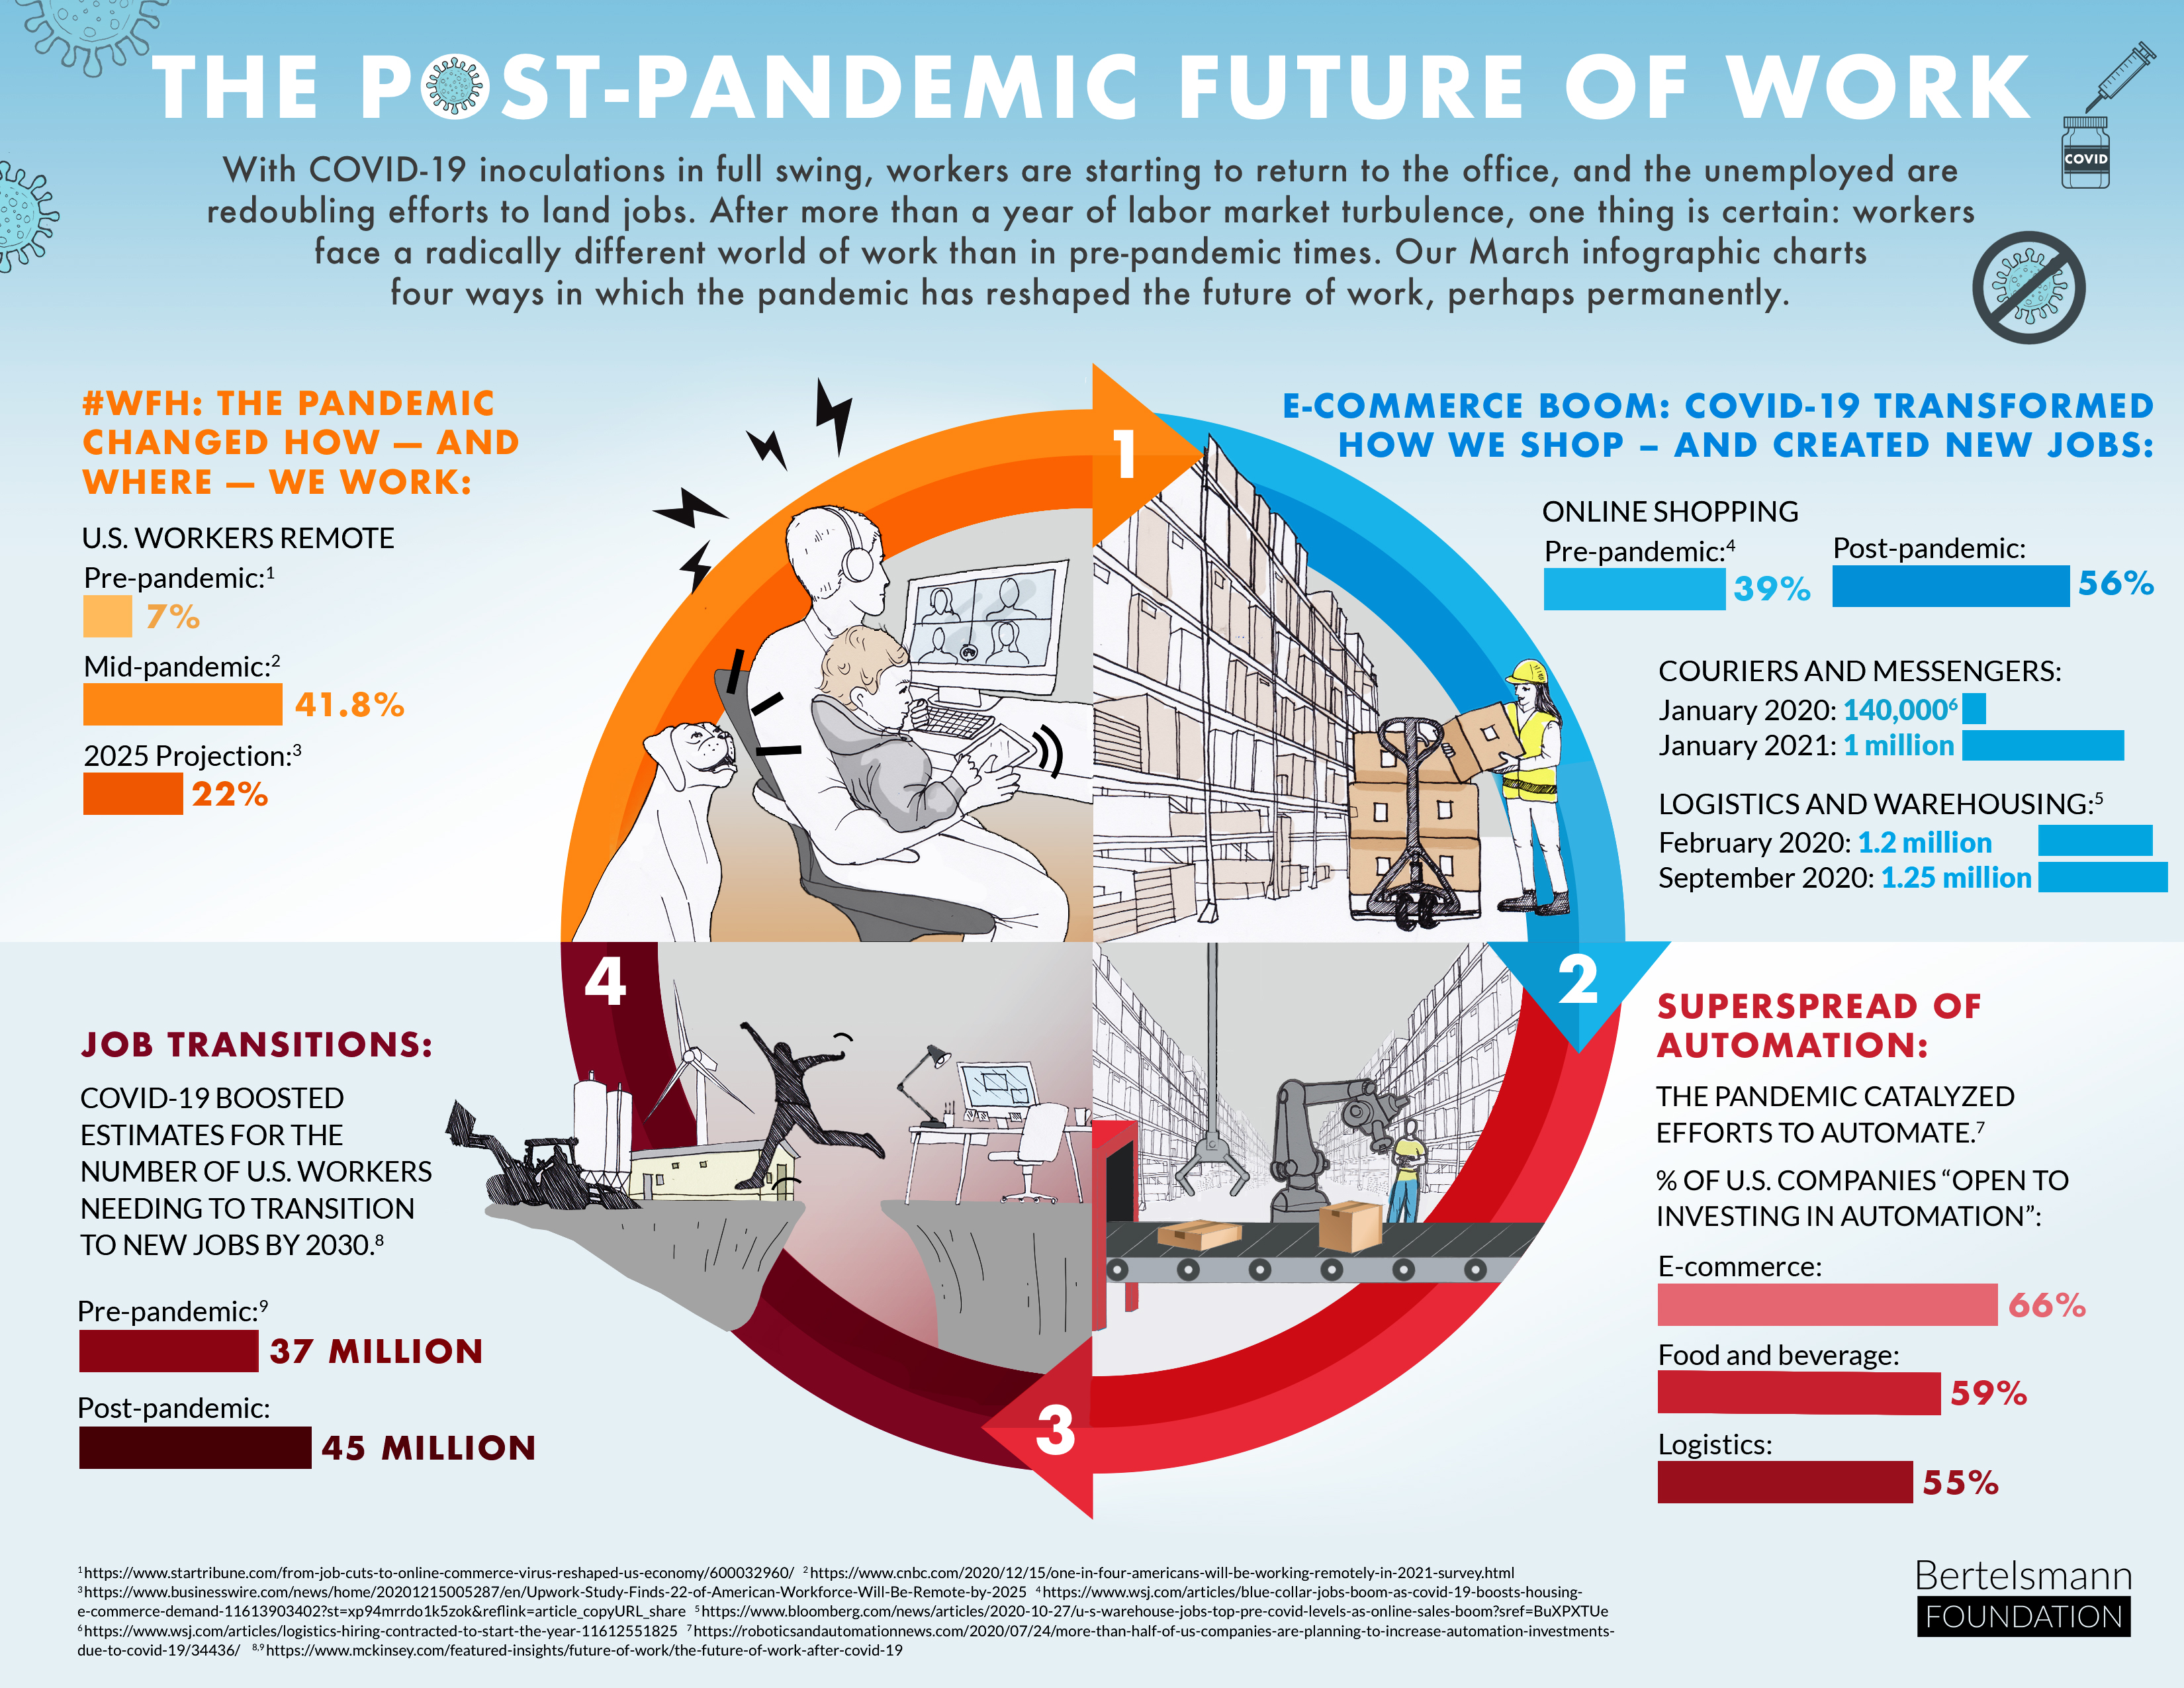 The Post-Pandemic Future of Work infographic